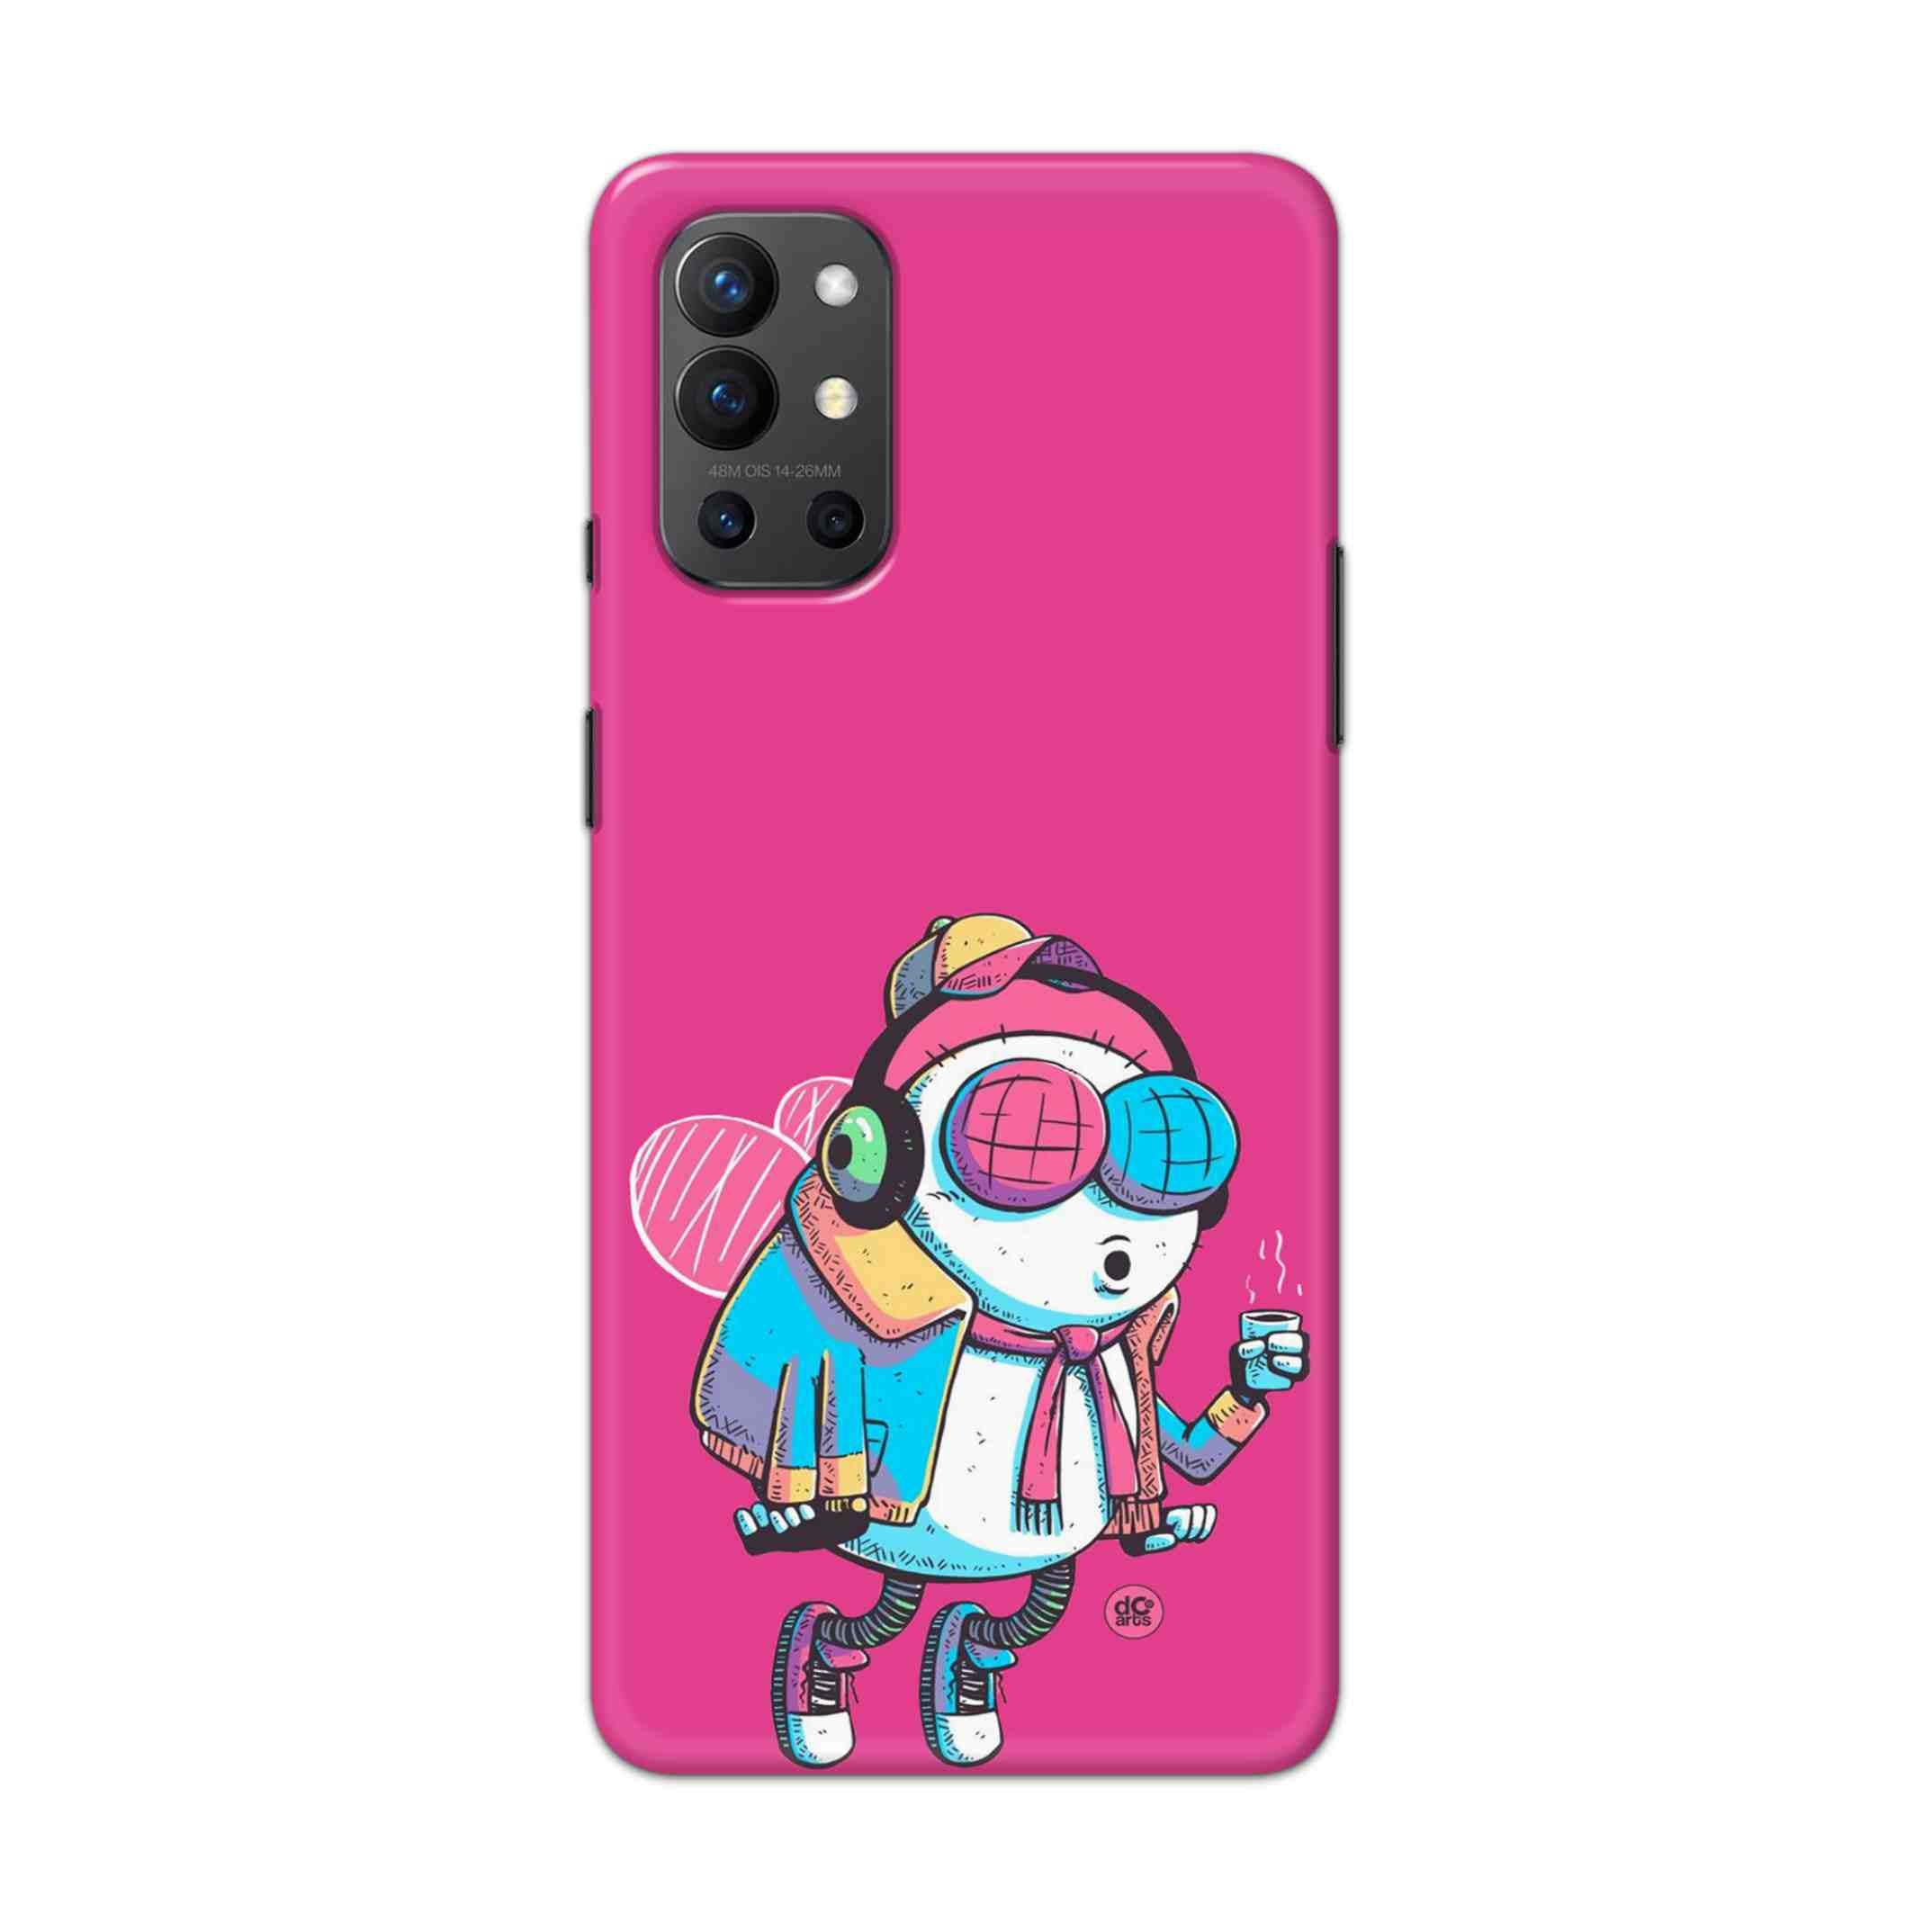 Buy Sky Fly Hard Back Mobile Phone Case Cover For OnePlus 9R / 8T Online